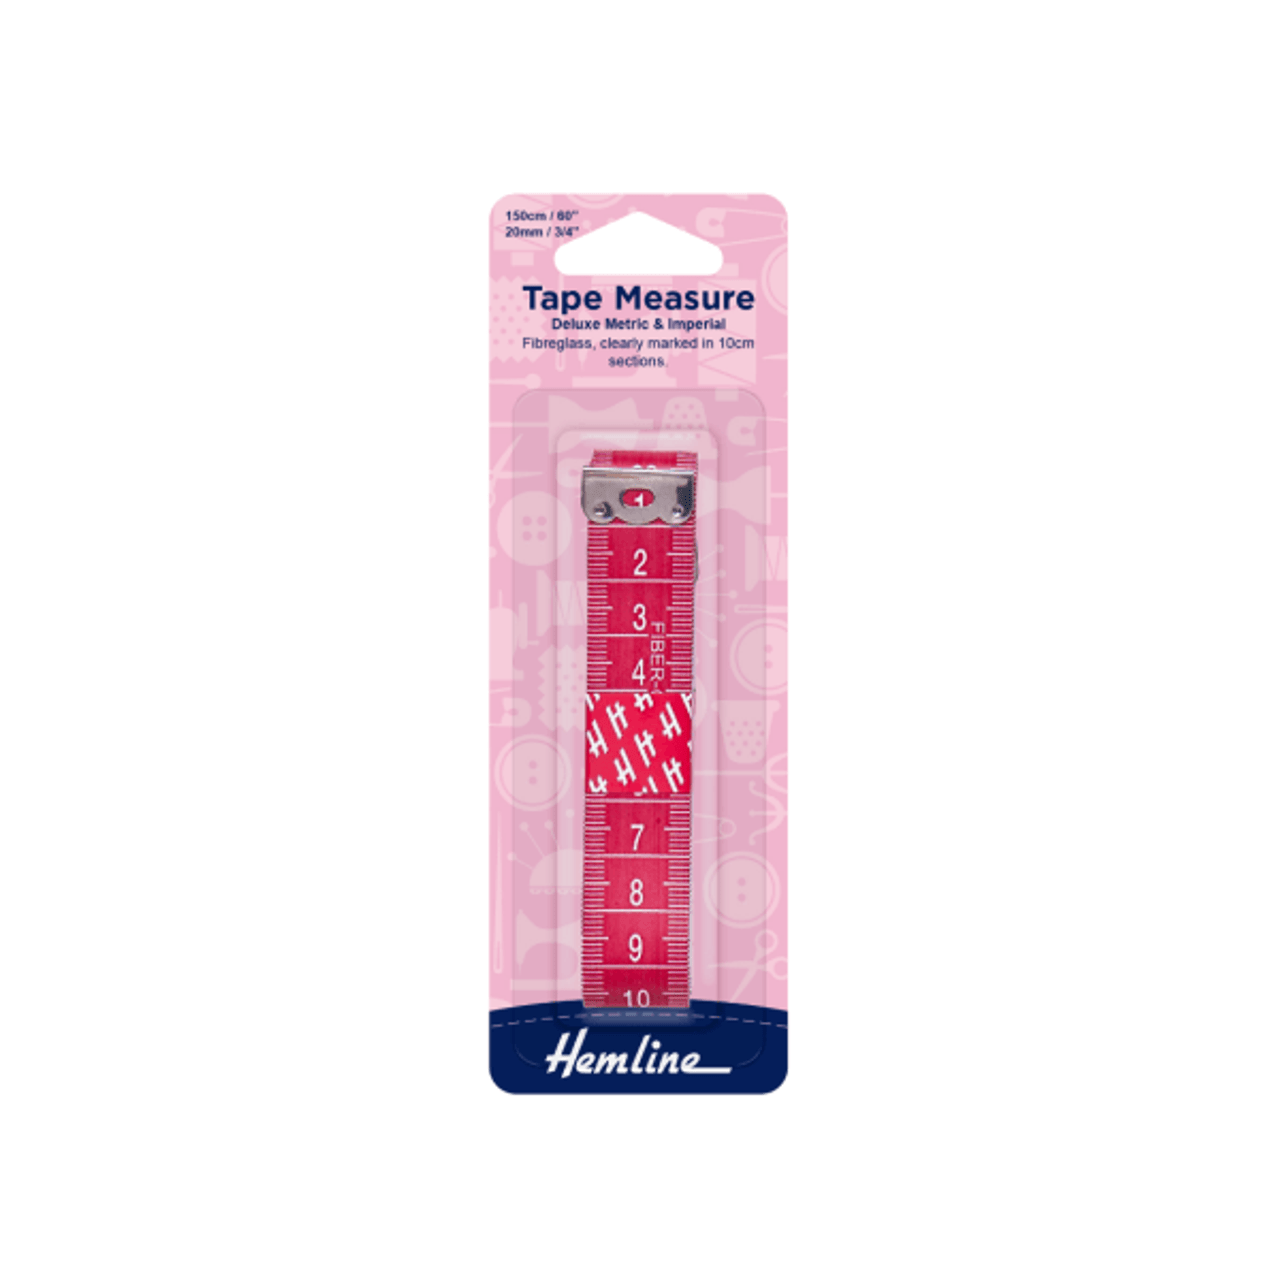 Take Accurate Measurements Every Time with Hemline Measuring Tape